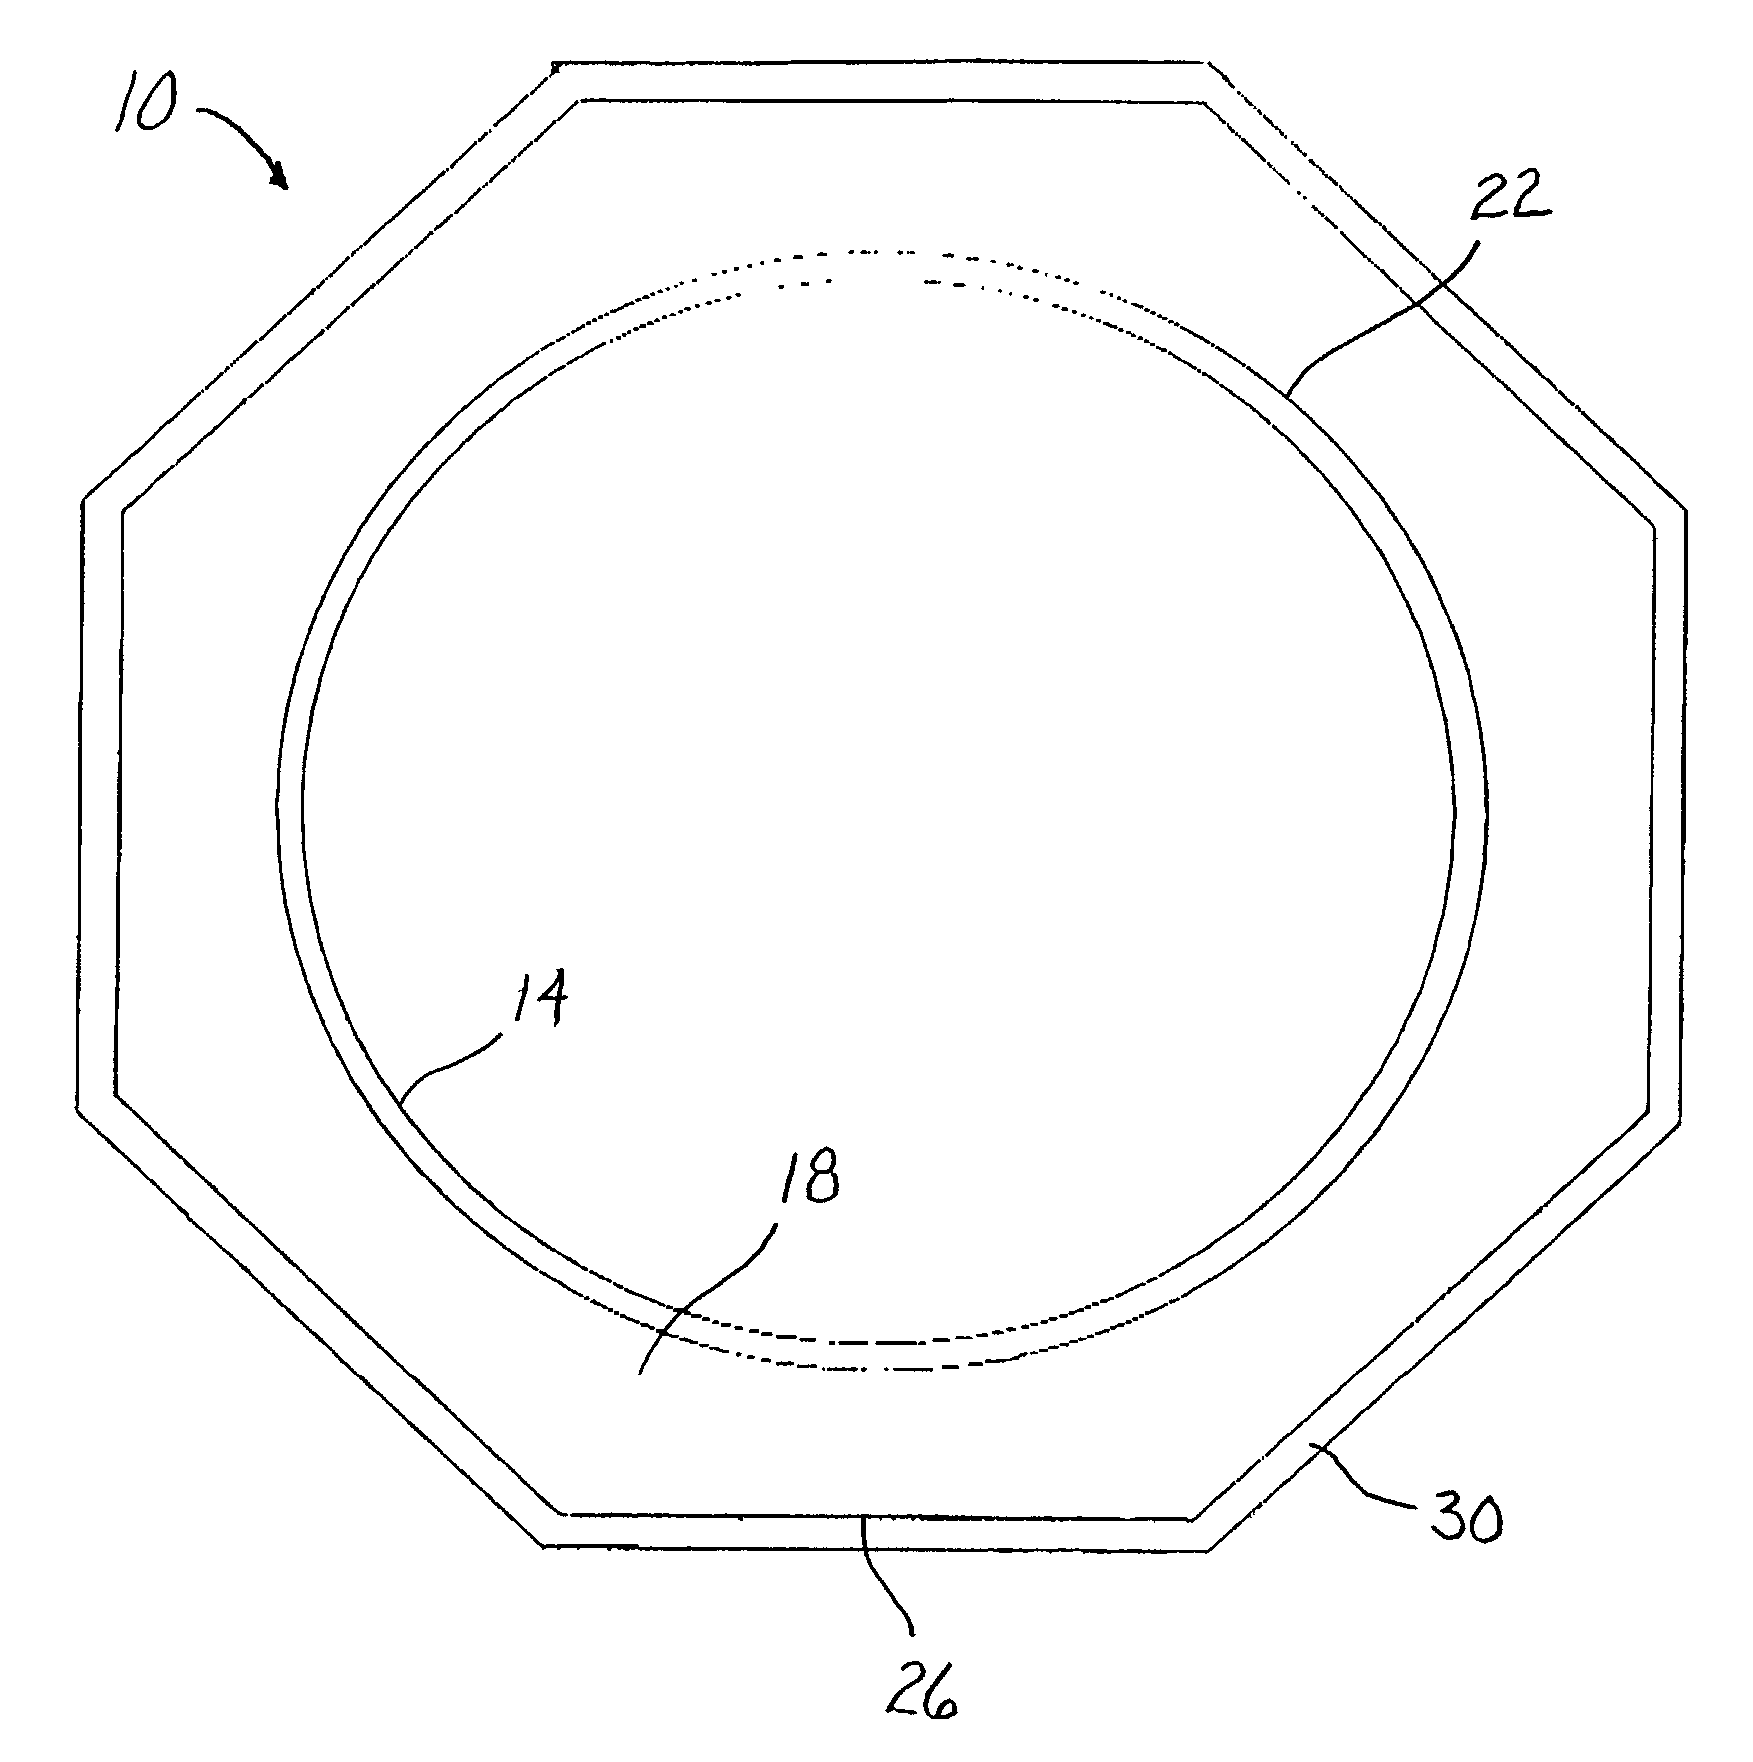 Method of manufacturing composite utility poles